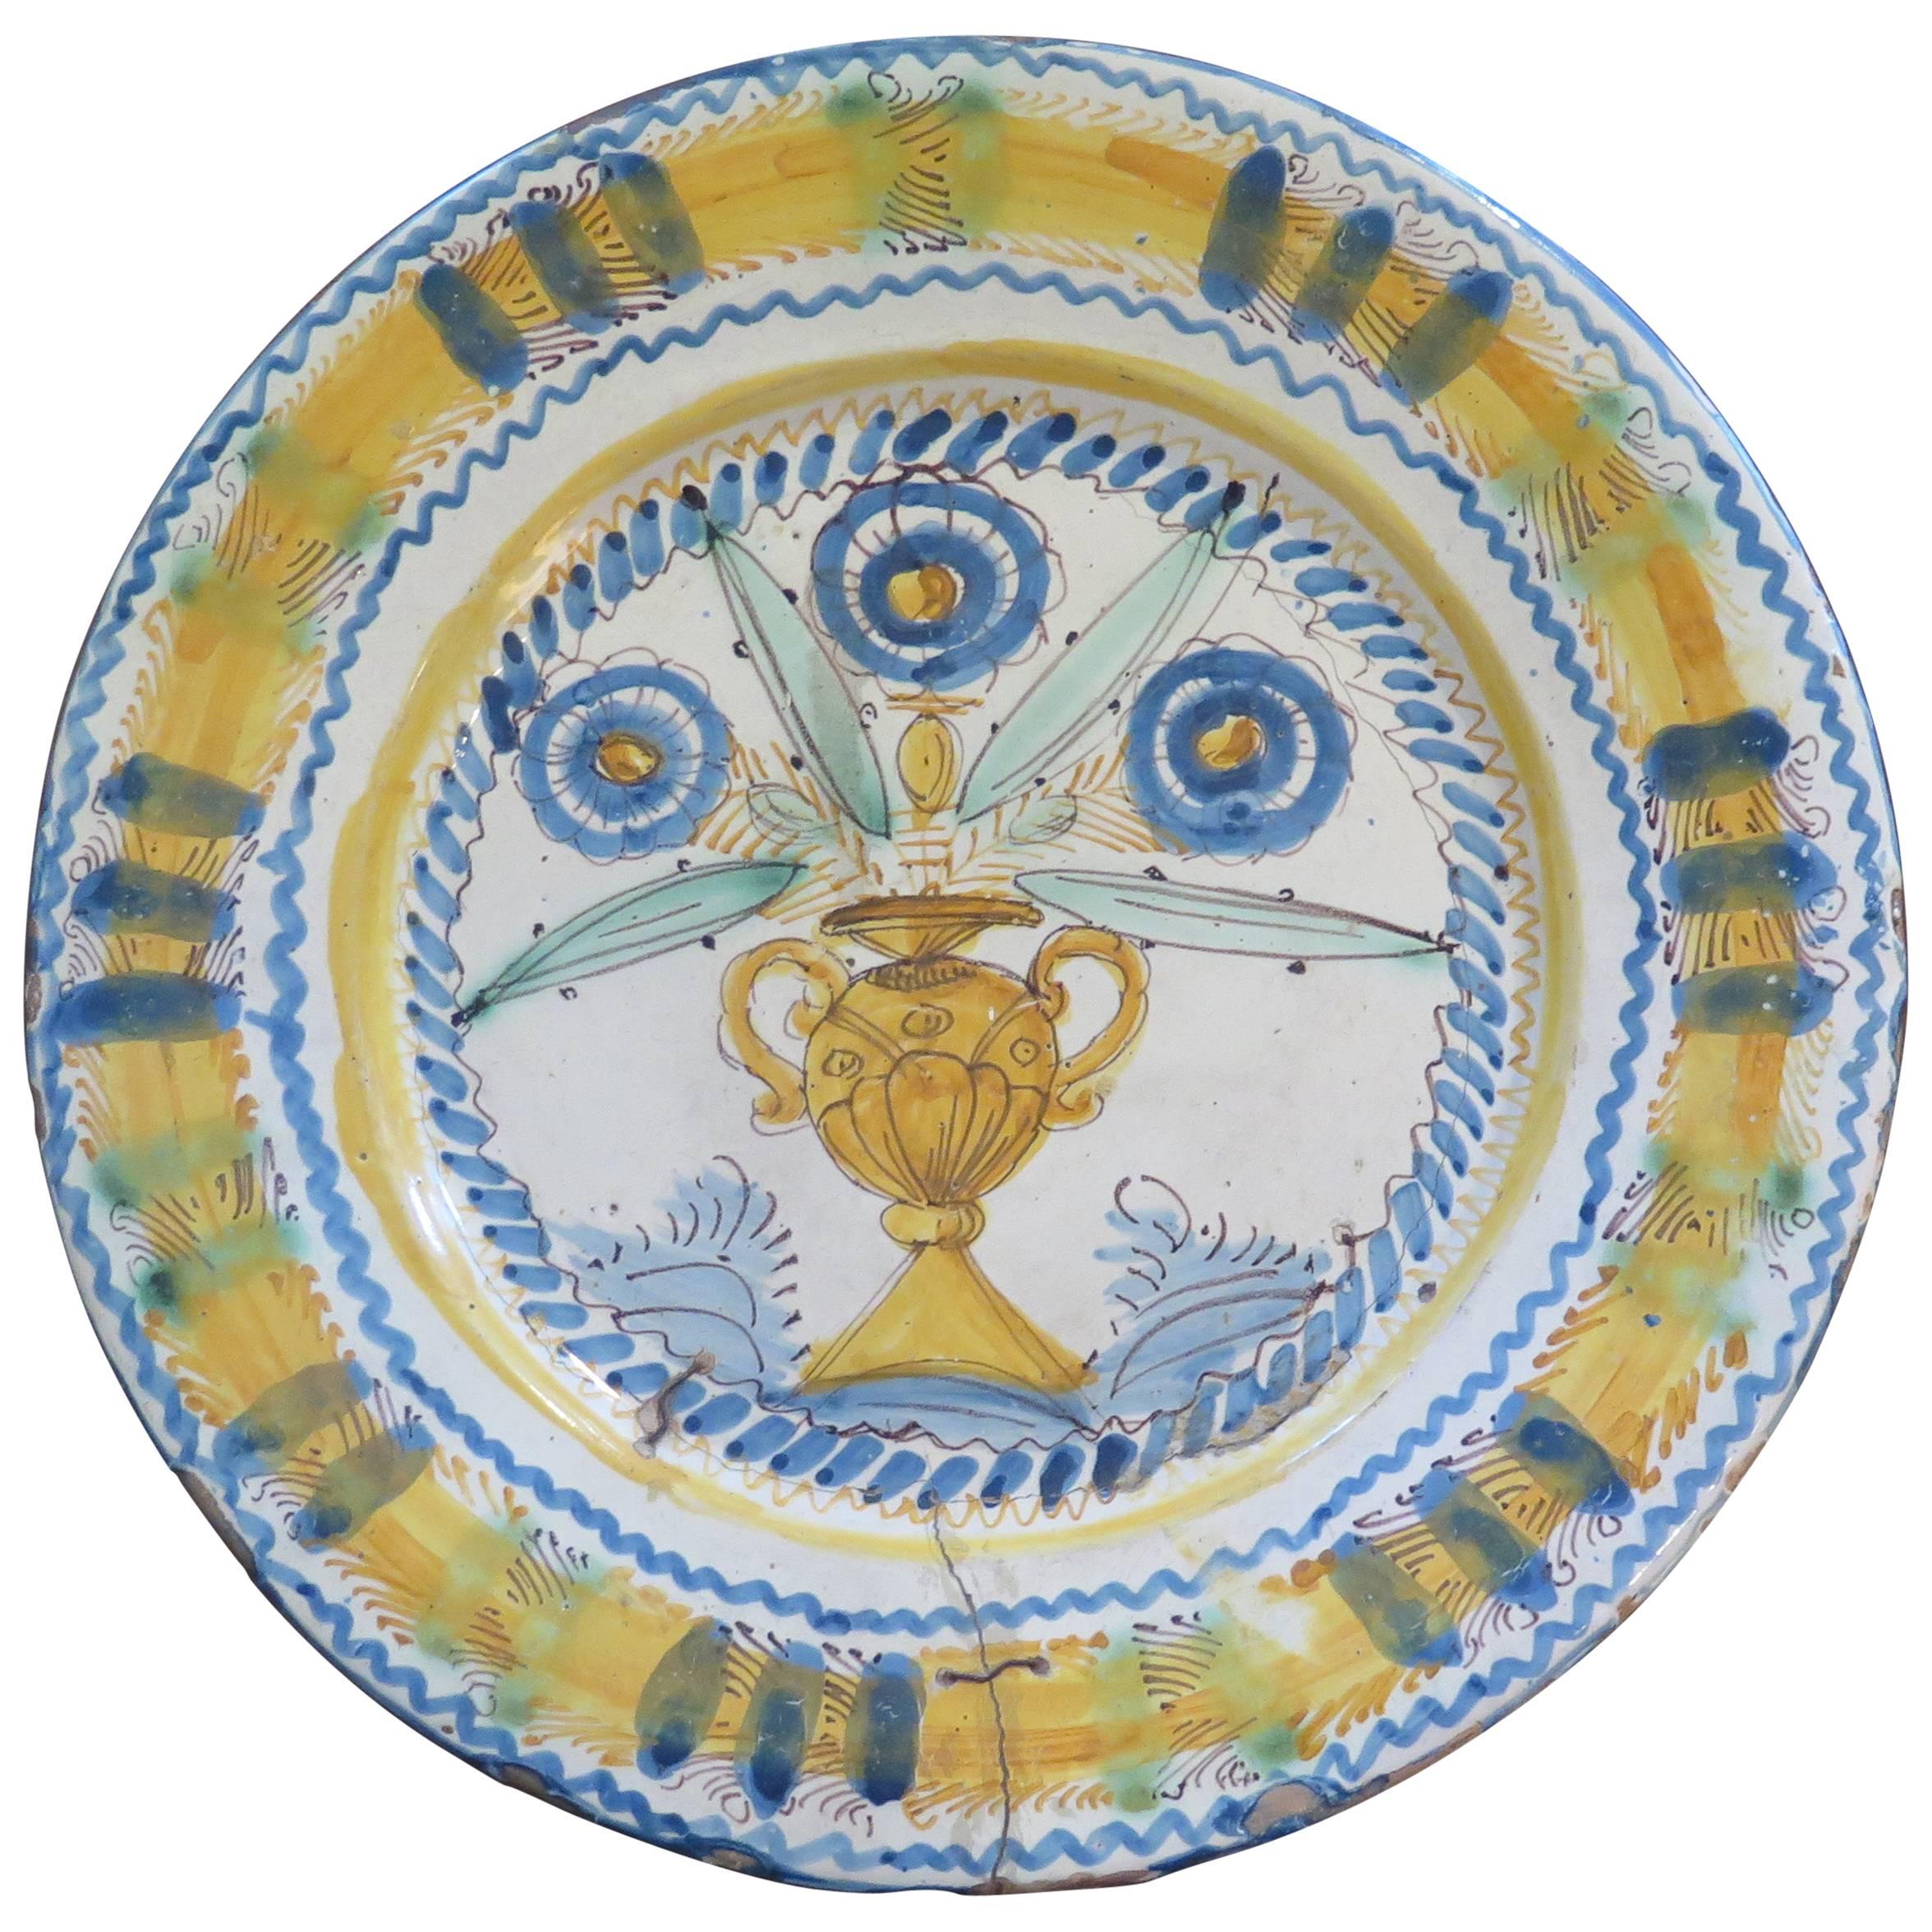 18th-Early 19th Century Spanish Plate